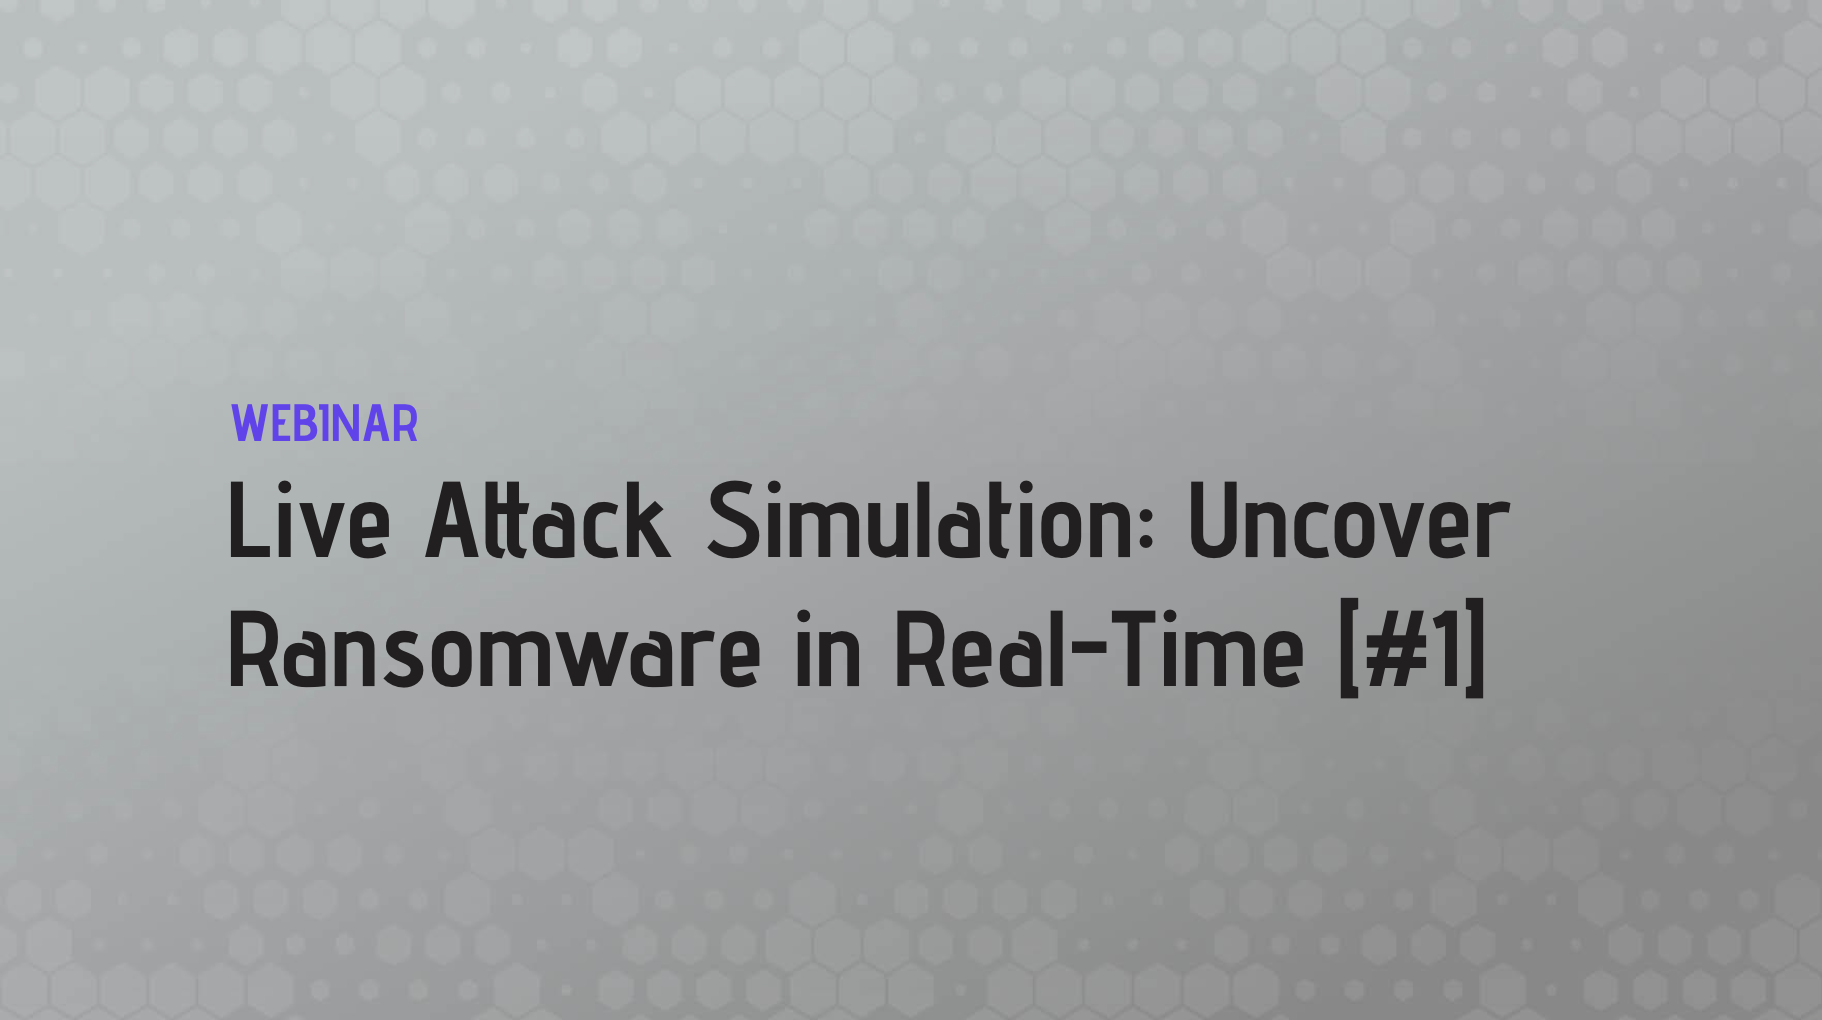 Live Attack Simulation: Uncover Ransomware in Real-Time [#1]